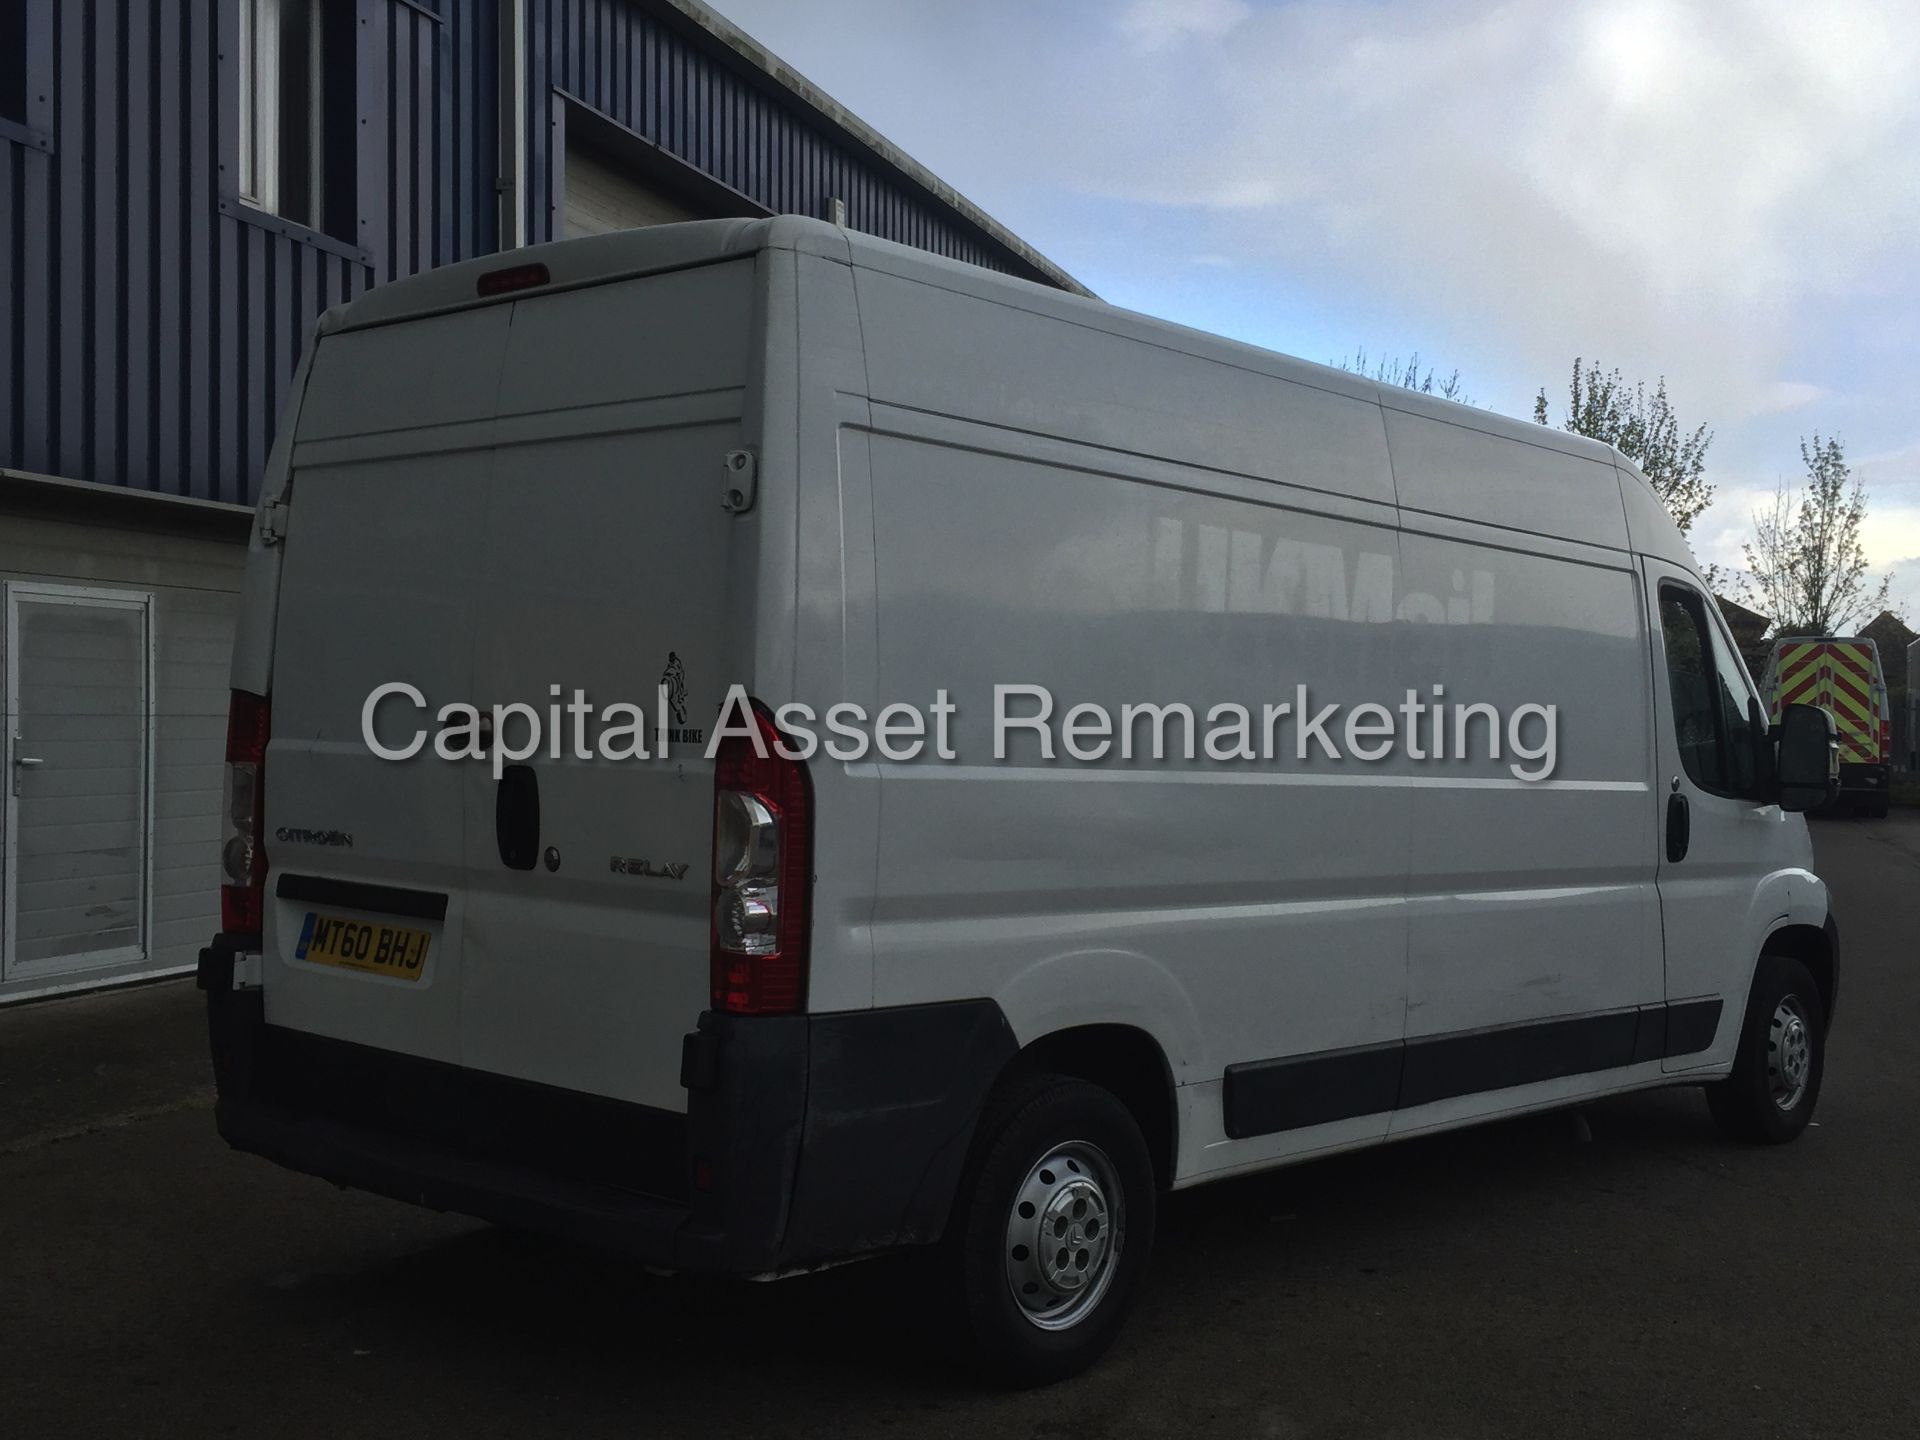 CITROEN RELAY 35 LWB HI-ROOF (2011 MODEL) 2.2 HDI - 120 PS - 6 SPEED (ELECTRIC PACK) - Image 8 of 19